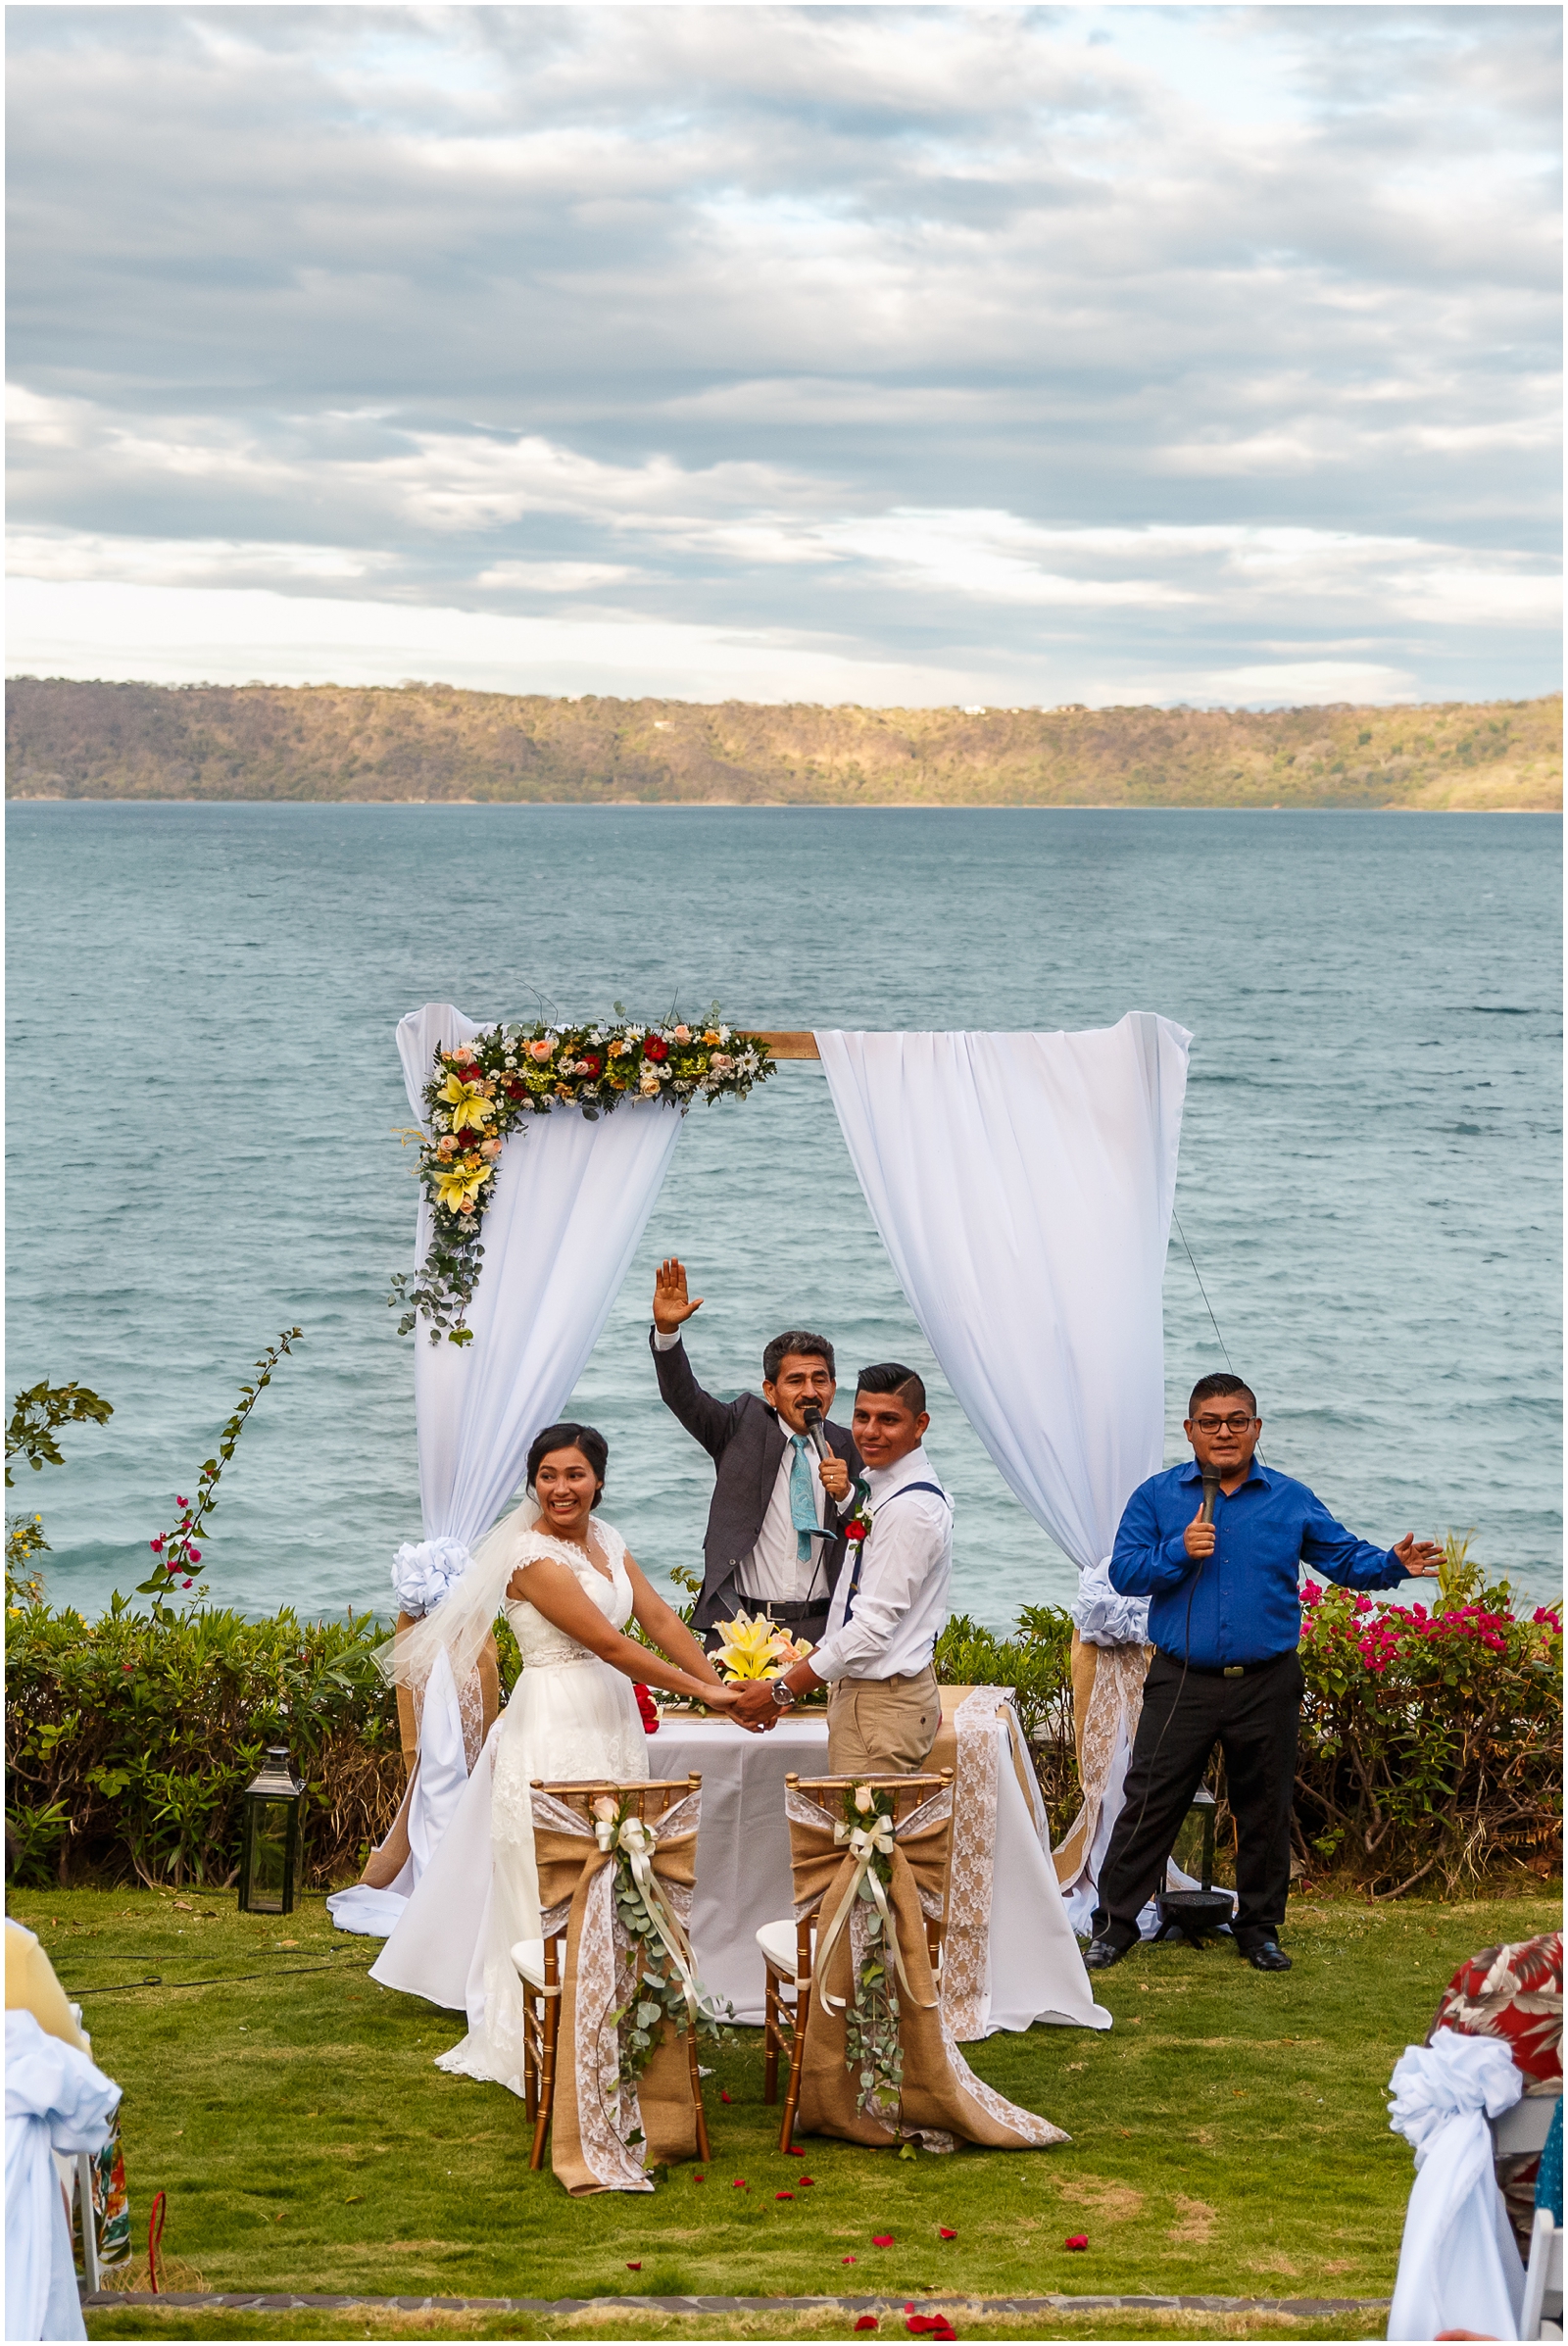 This couple got married in front of a Nicaraguan lake.